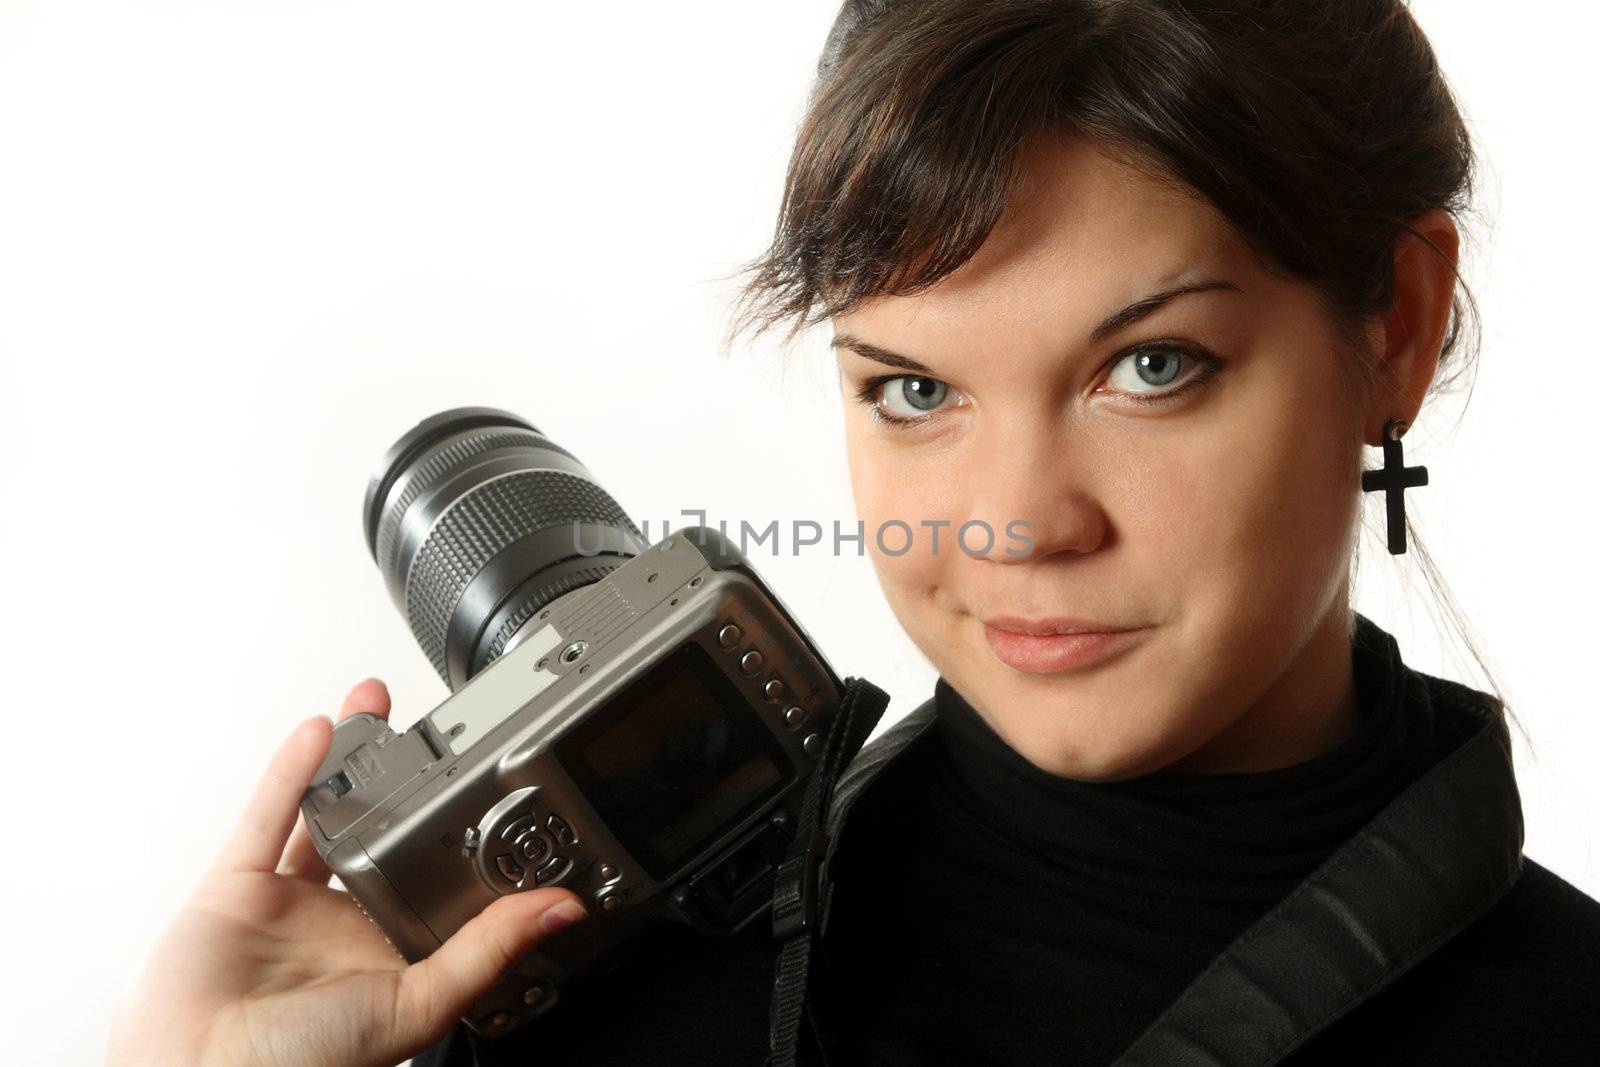 The beautiful girl with a camera on a white background